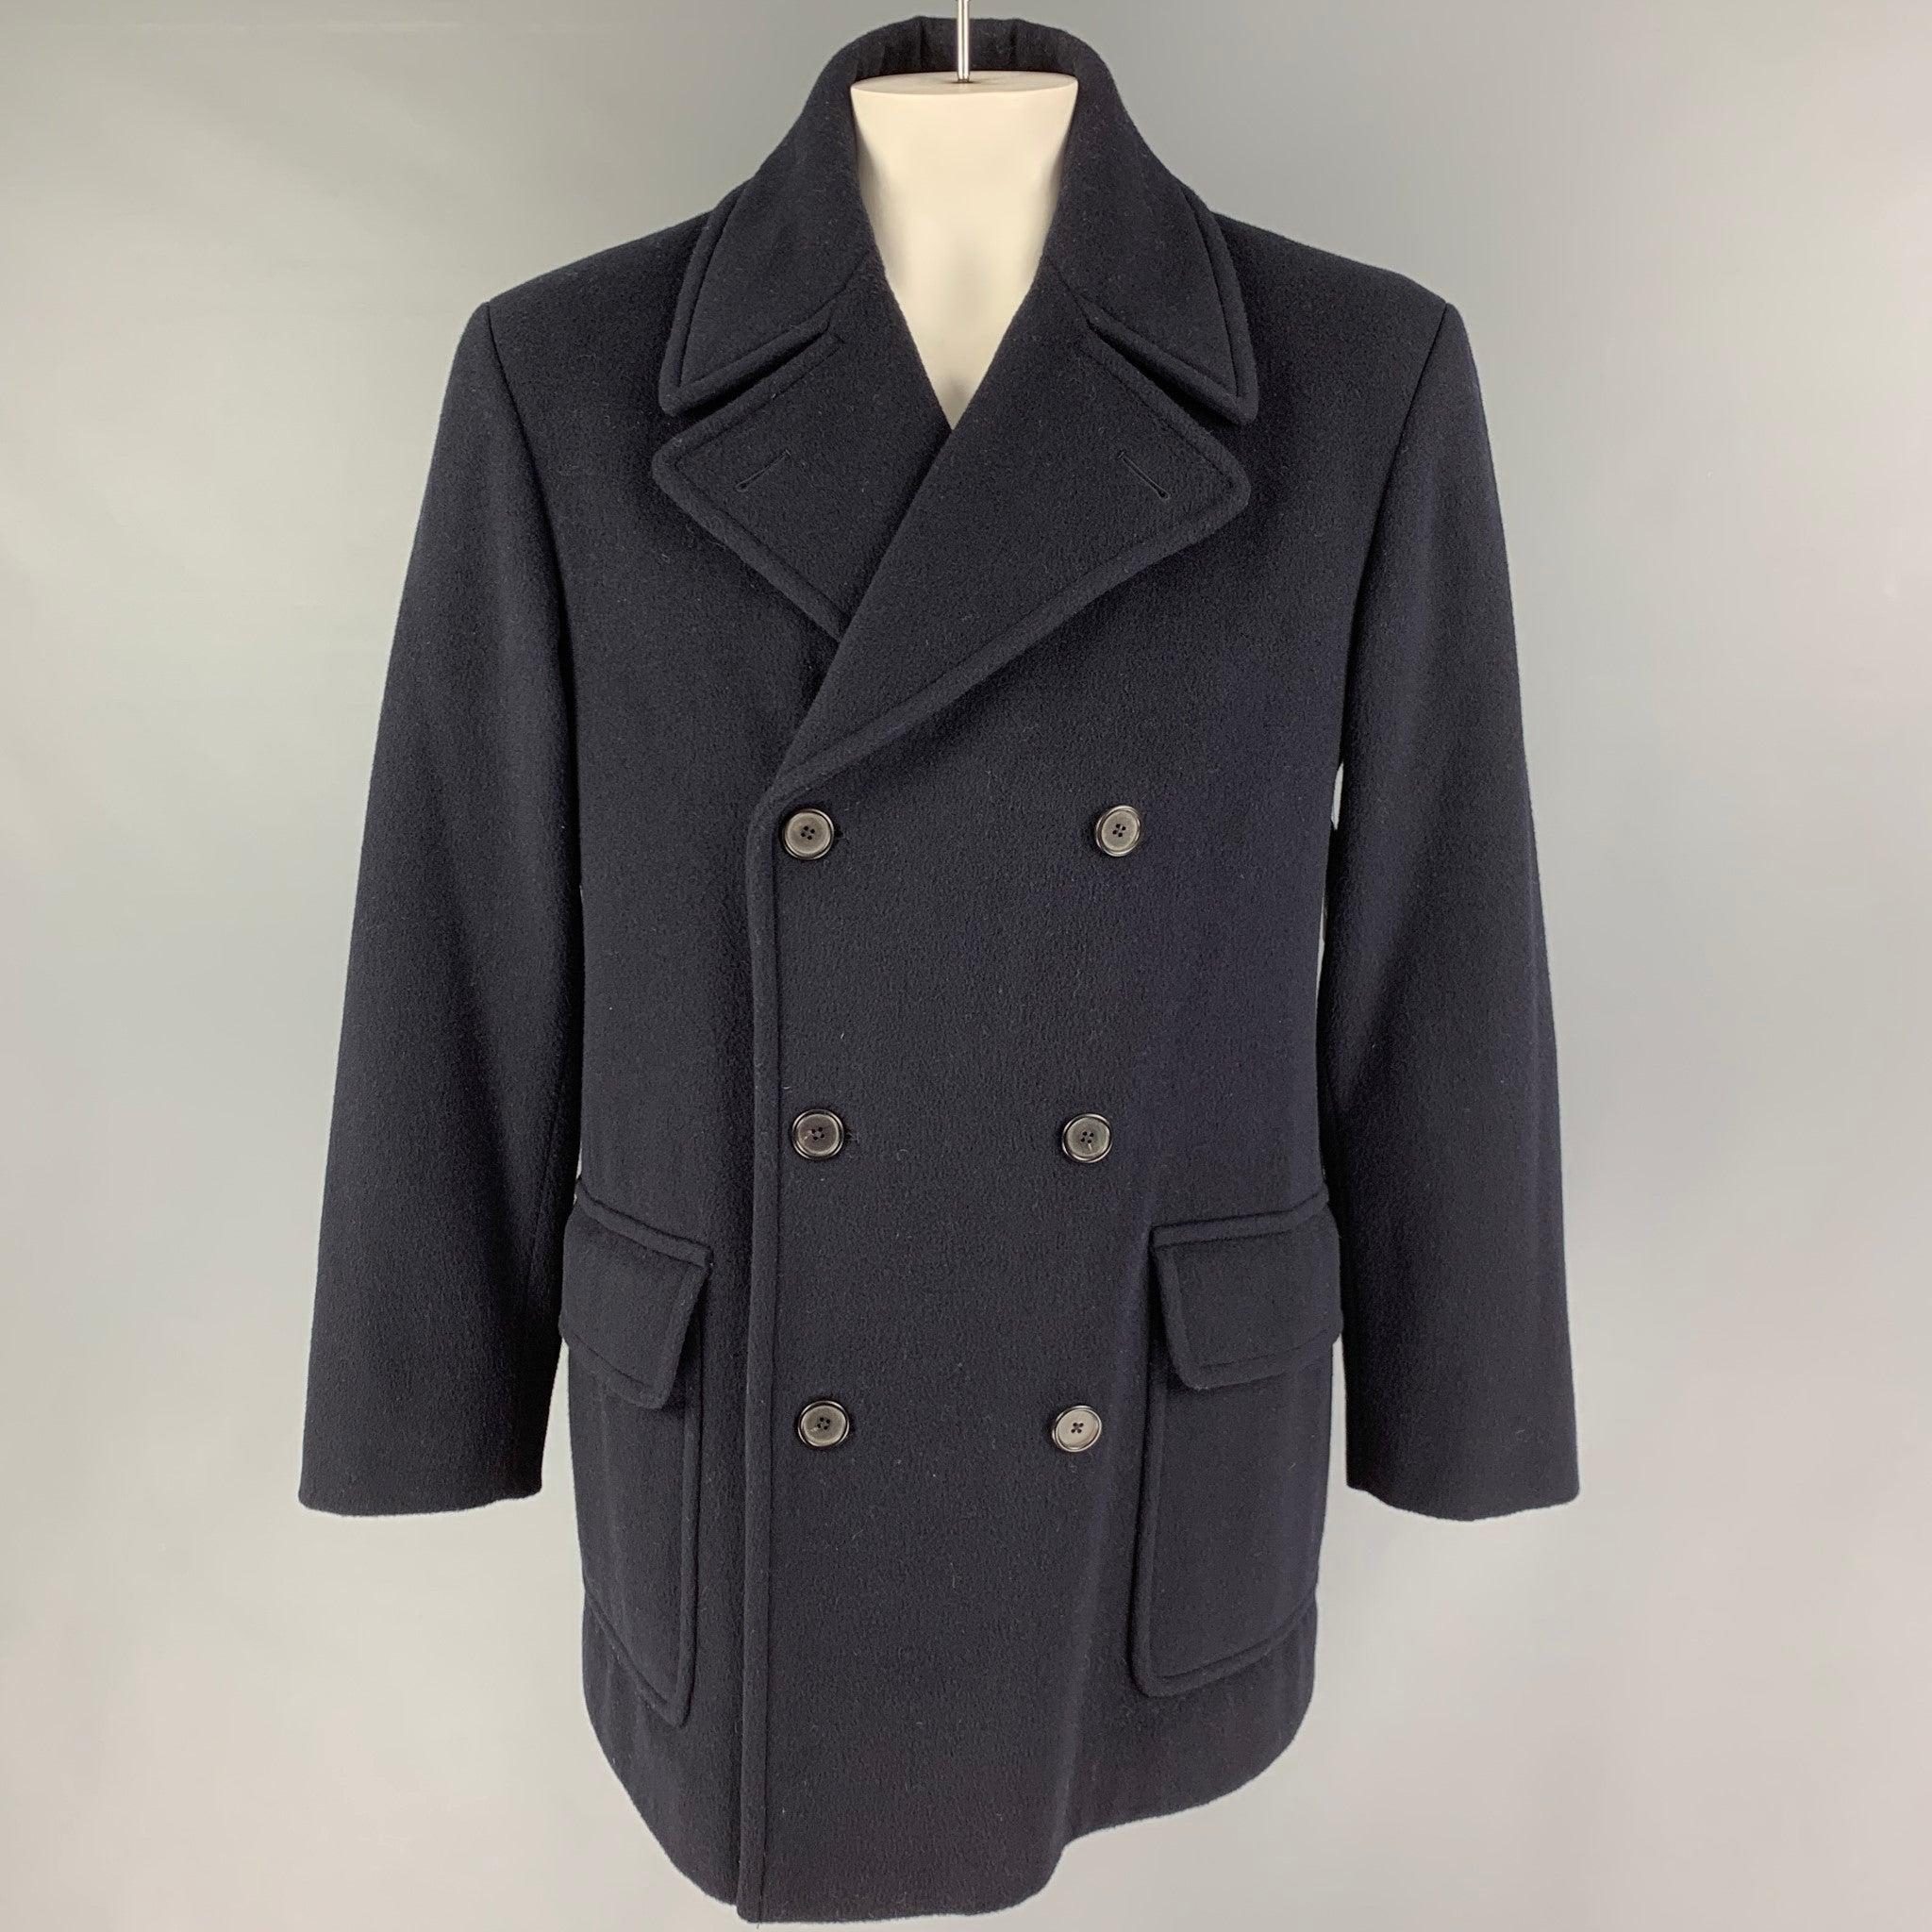 RALPH LAUREN 'Purple Label' coat comes in a navy lana wool with a full liner featuring a notch lapel, storm flap, flap pockets, and a double breasted closure. Made in Italy.Very Good
Pre-Owned Condition. 

Marked:  L 

Measurements: 
 
Shoulder: 20